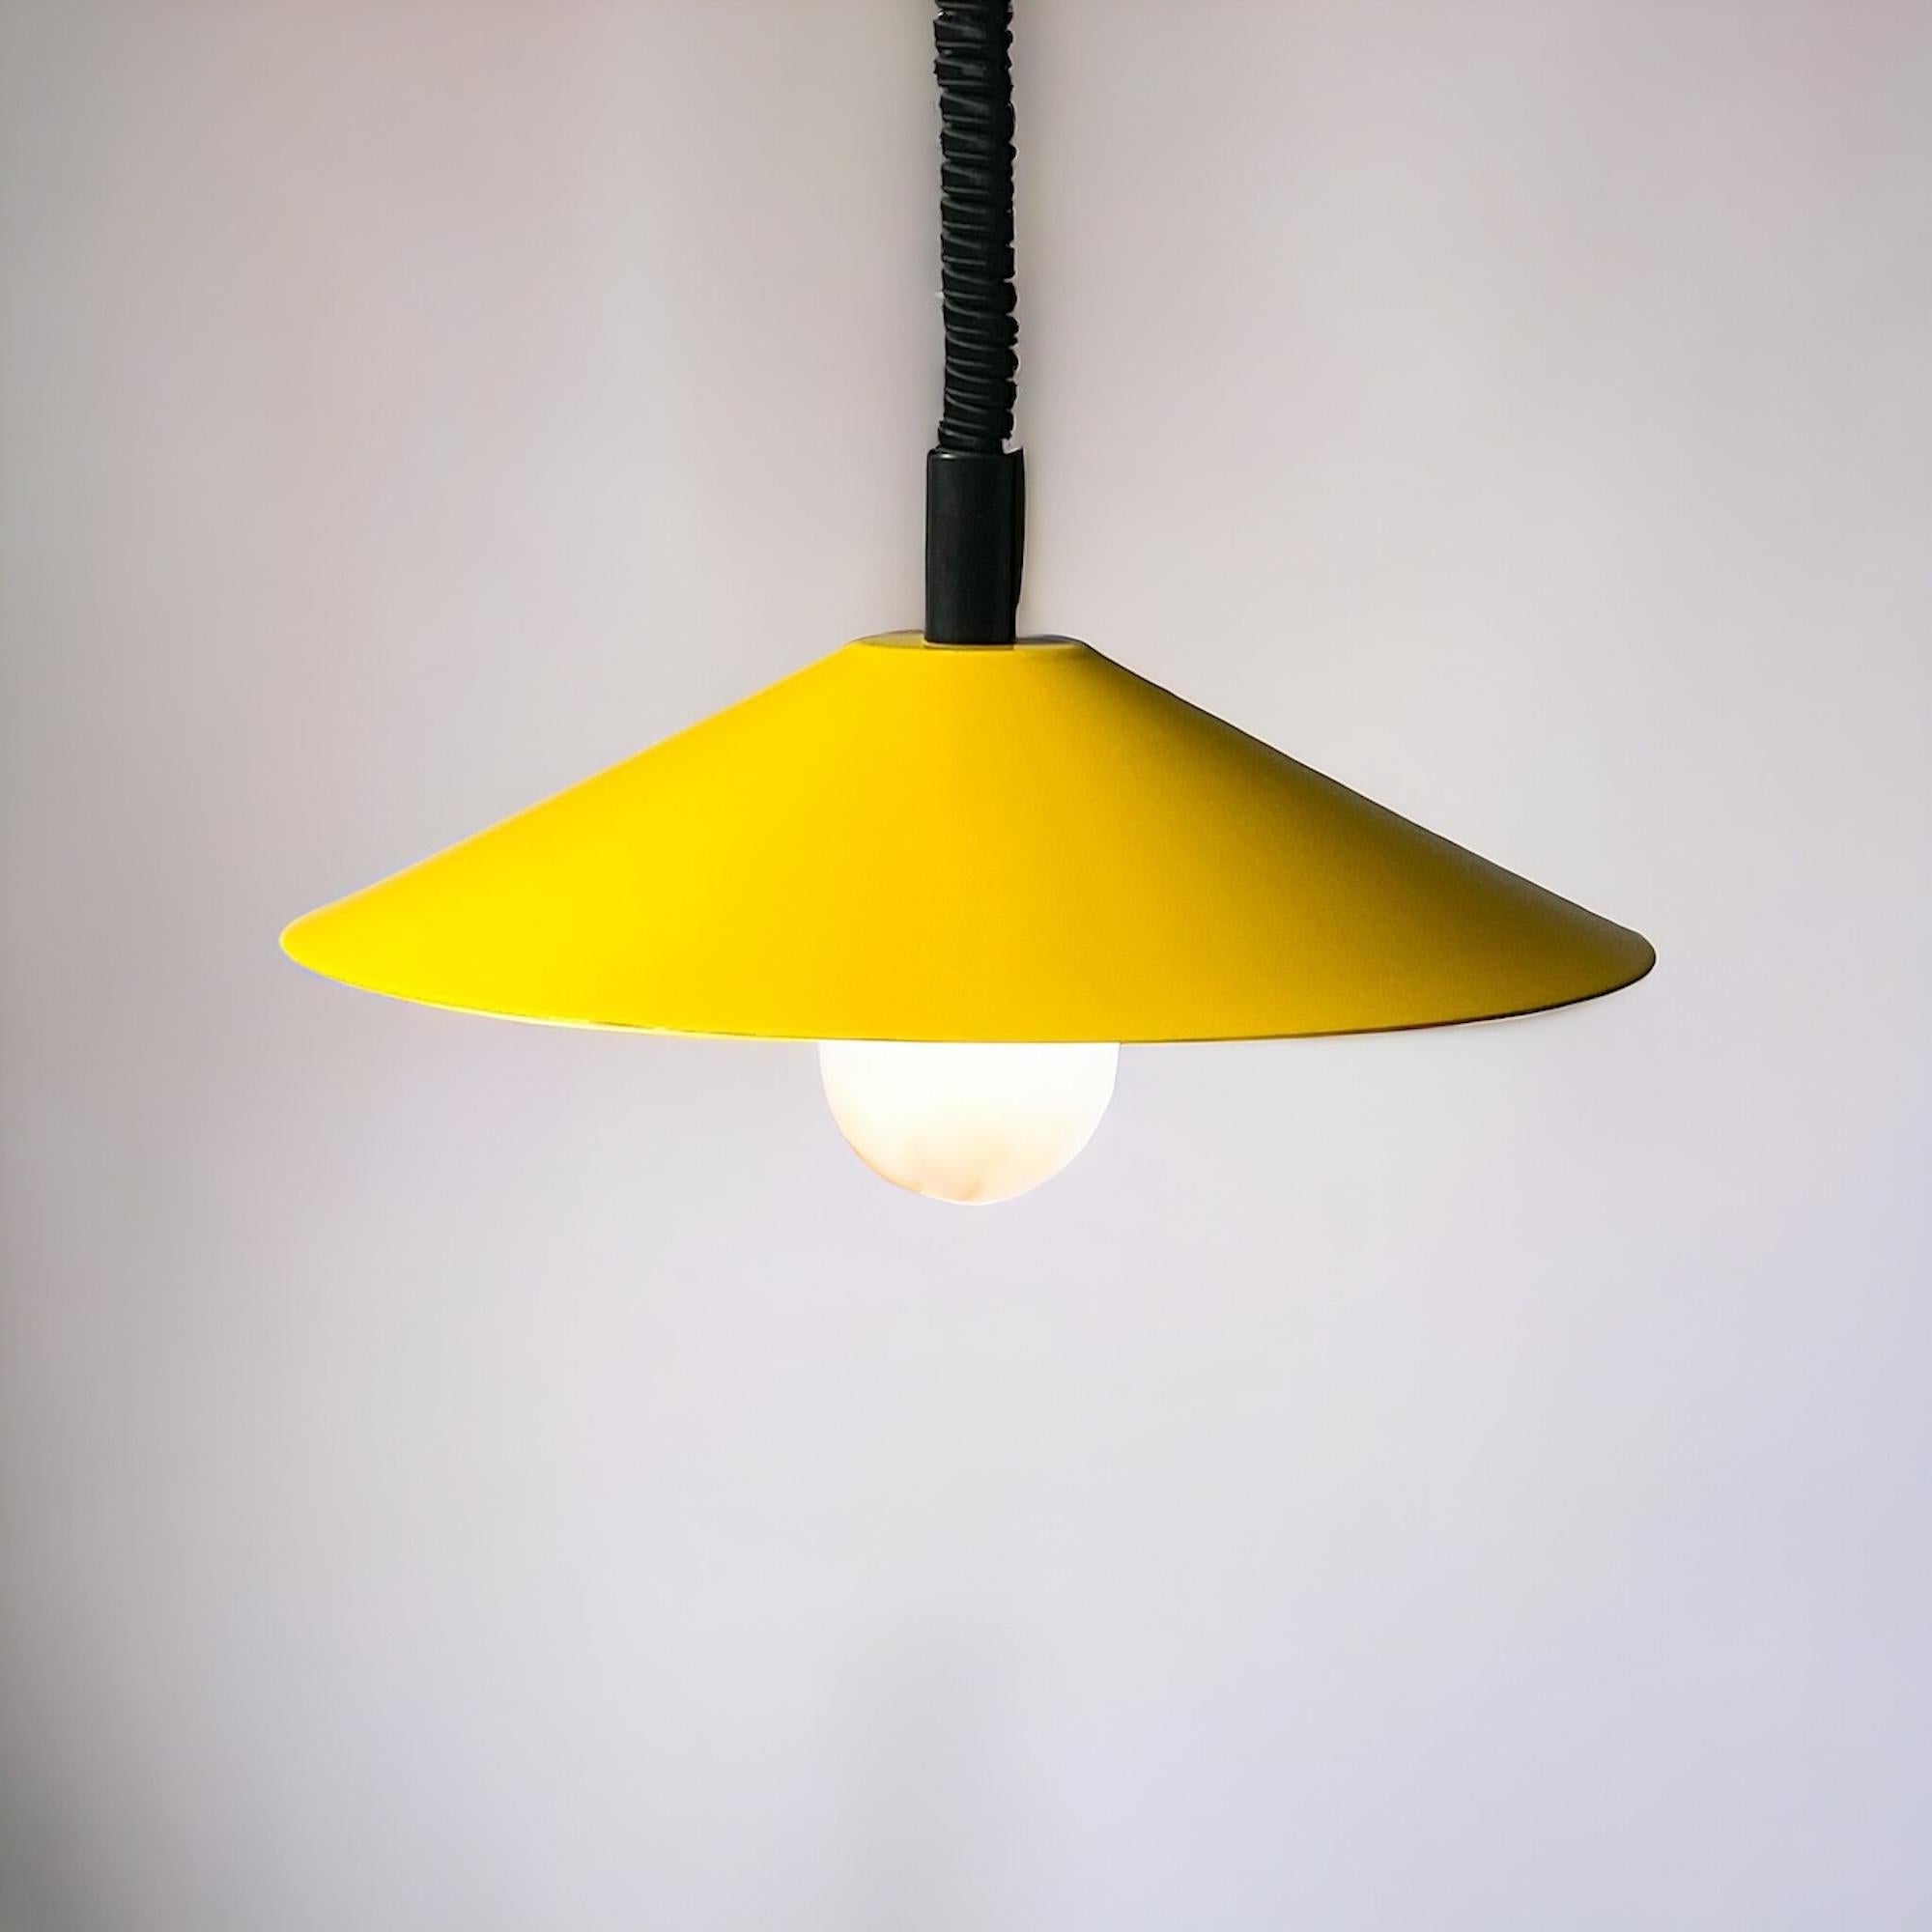 Vintage 1970s Italian Space Age Hanging Lamp - Vibrant Yellow Hue 2